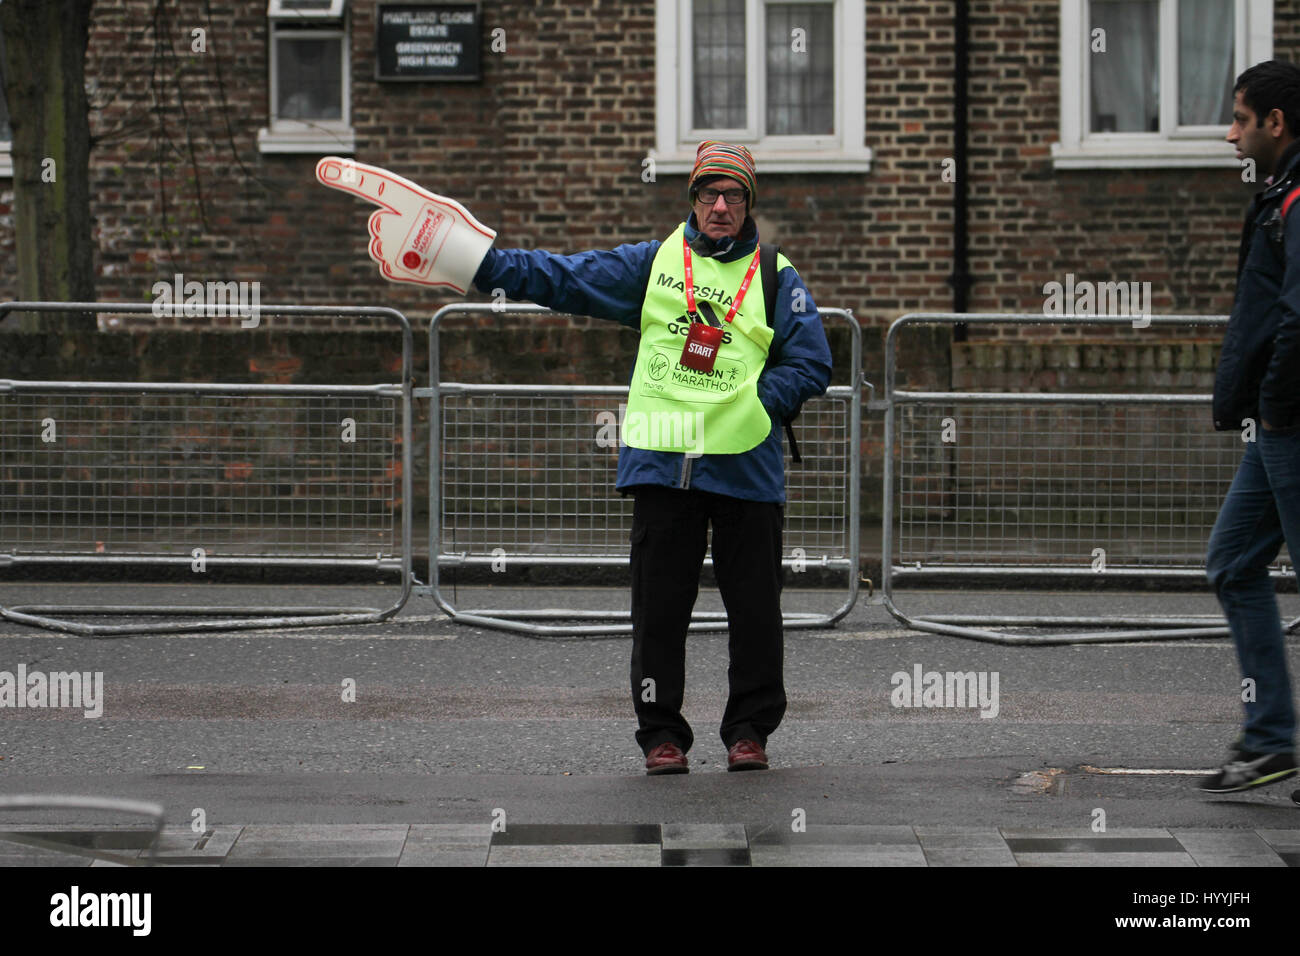 London, UK 24 April 2016. A marshall directs runners for the annual Virgin Money London Marathon at Greenwich on 24th April 2016. Three quarters of all London Marathon competitors run for a charity, the NSPCC being the Official charity of the 2016 marathon.Approximately 38,000 runners are expected to start the run, with the London Marathon’s one millionth finisher crosing the line during this years race, a milestone in the history of the race that started in 1981. © David Mbiyu/Alamy Live News Stock Photo